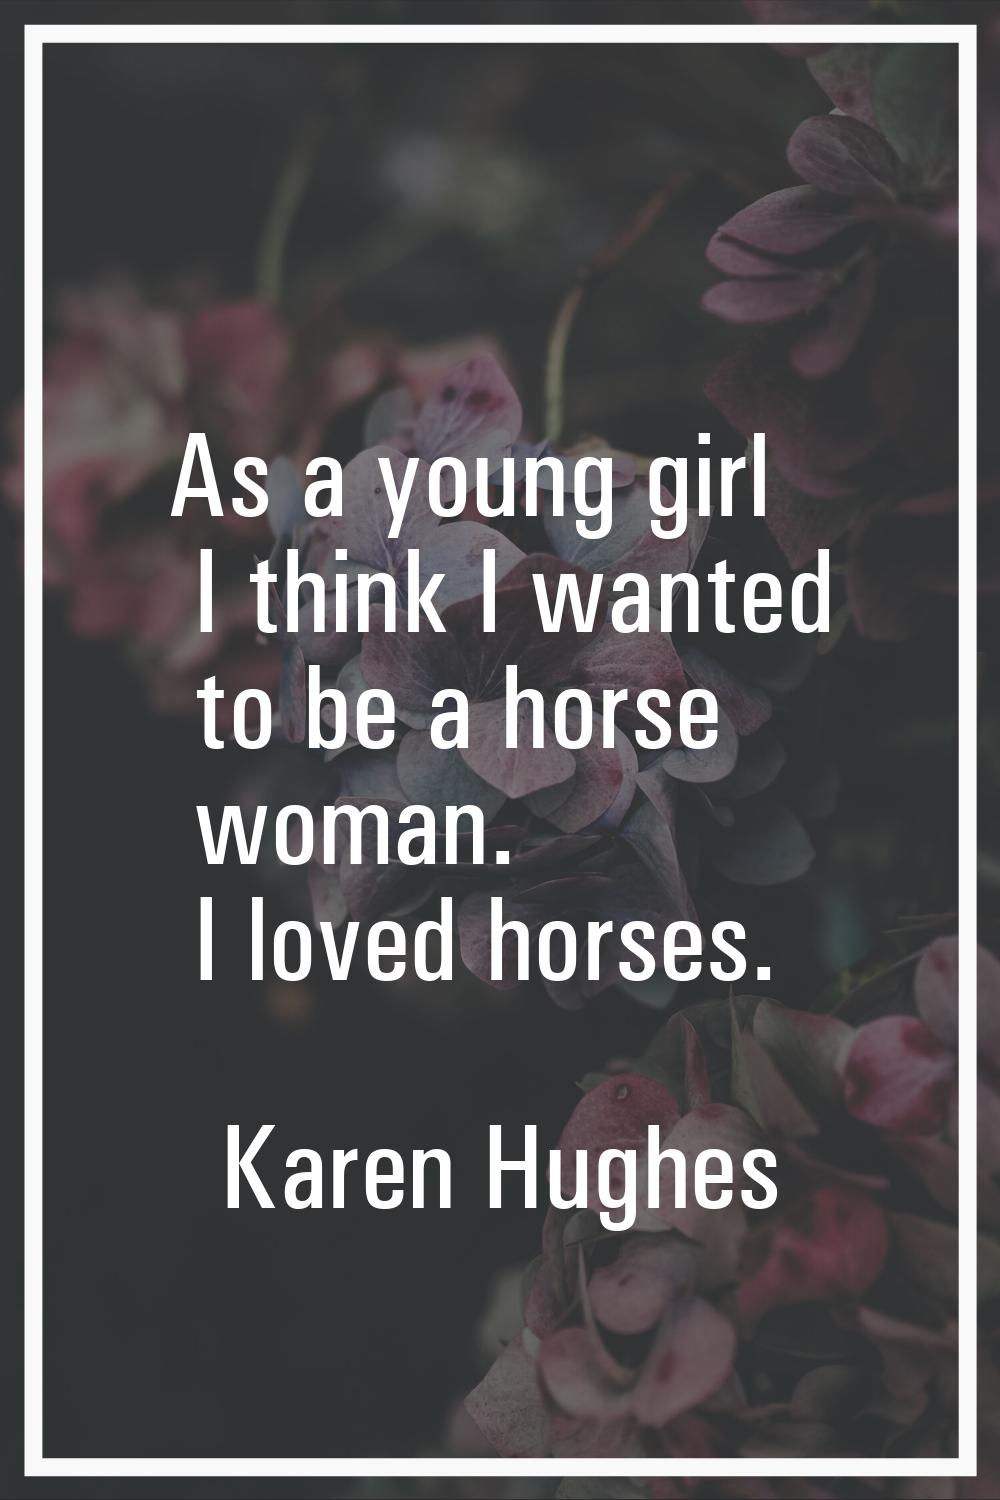 As a young girl I think I wanted to be a horse woman. I loved horses.